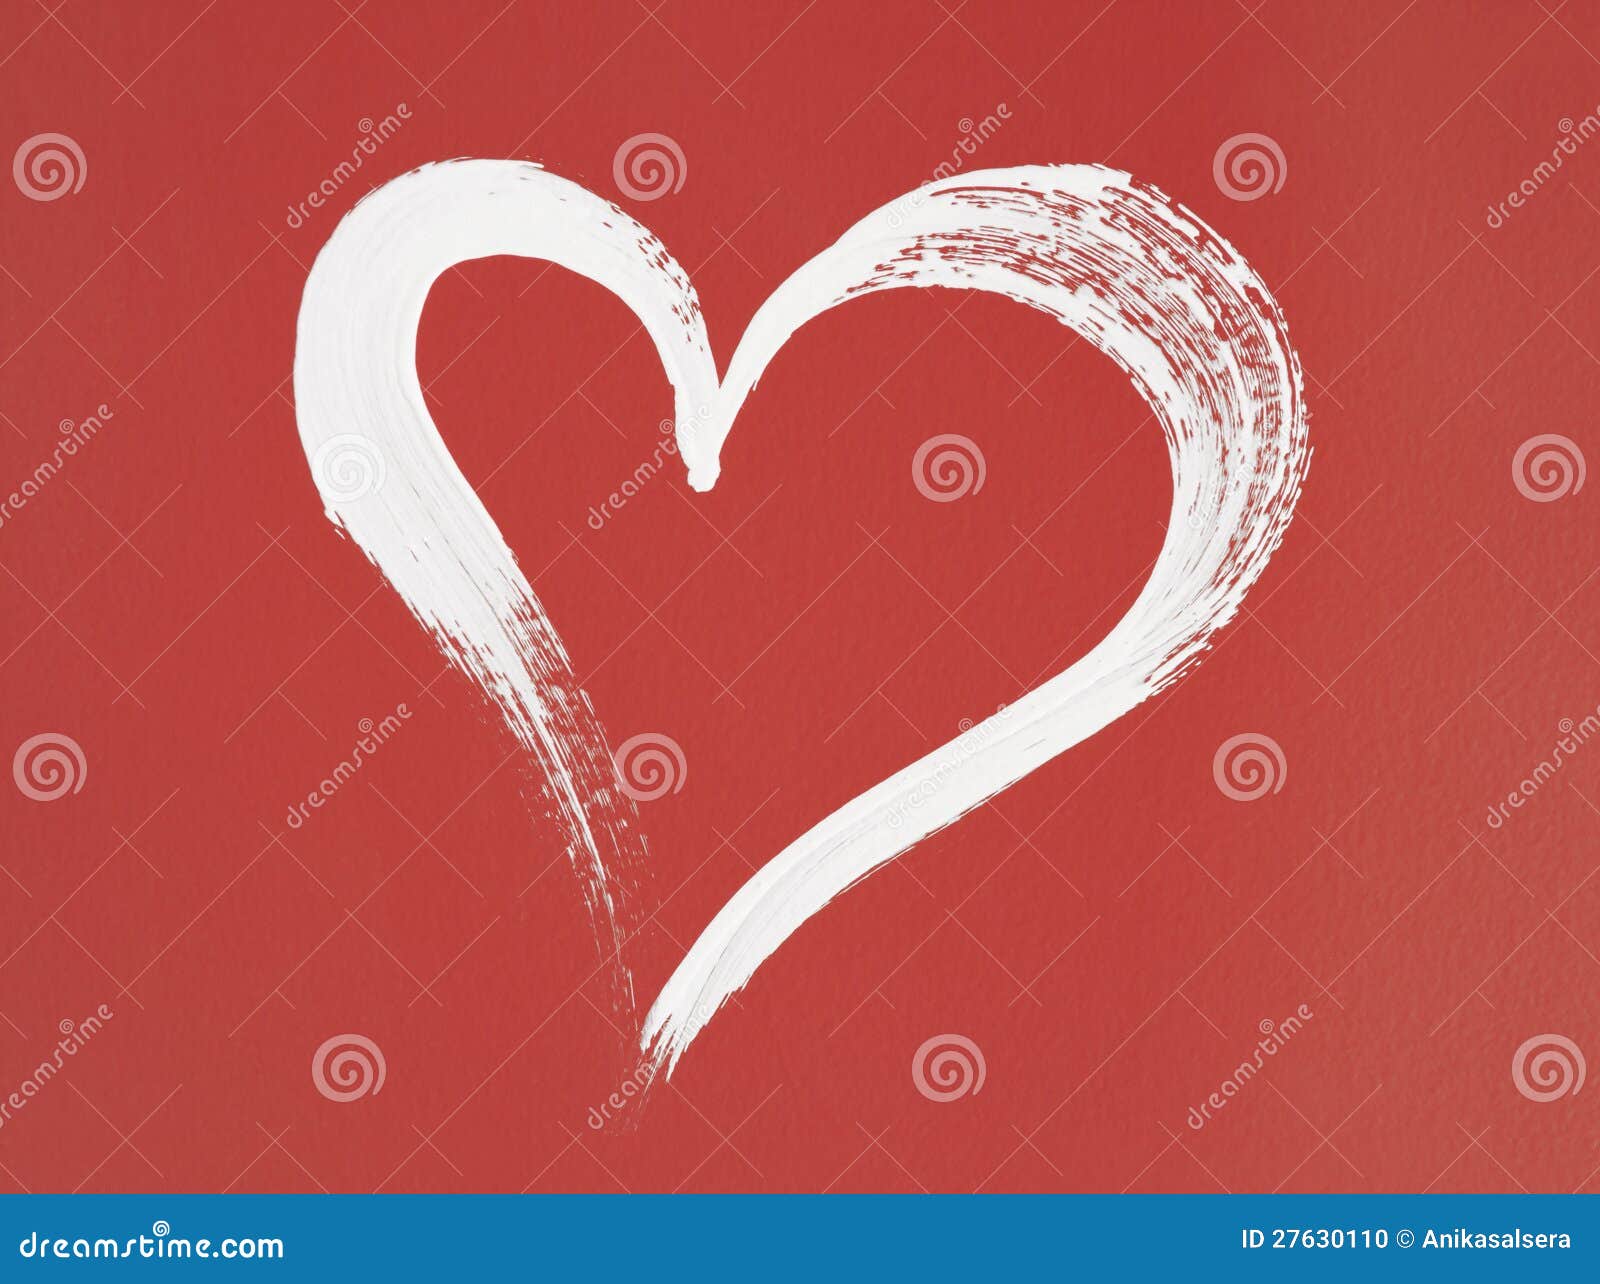 1,260 Red Heart Outline Stock Photos - Free & Royalty-Free Stock Photos  from Dreamstime